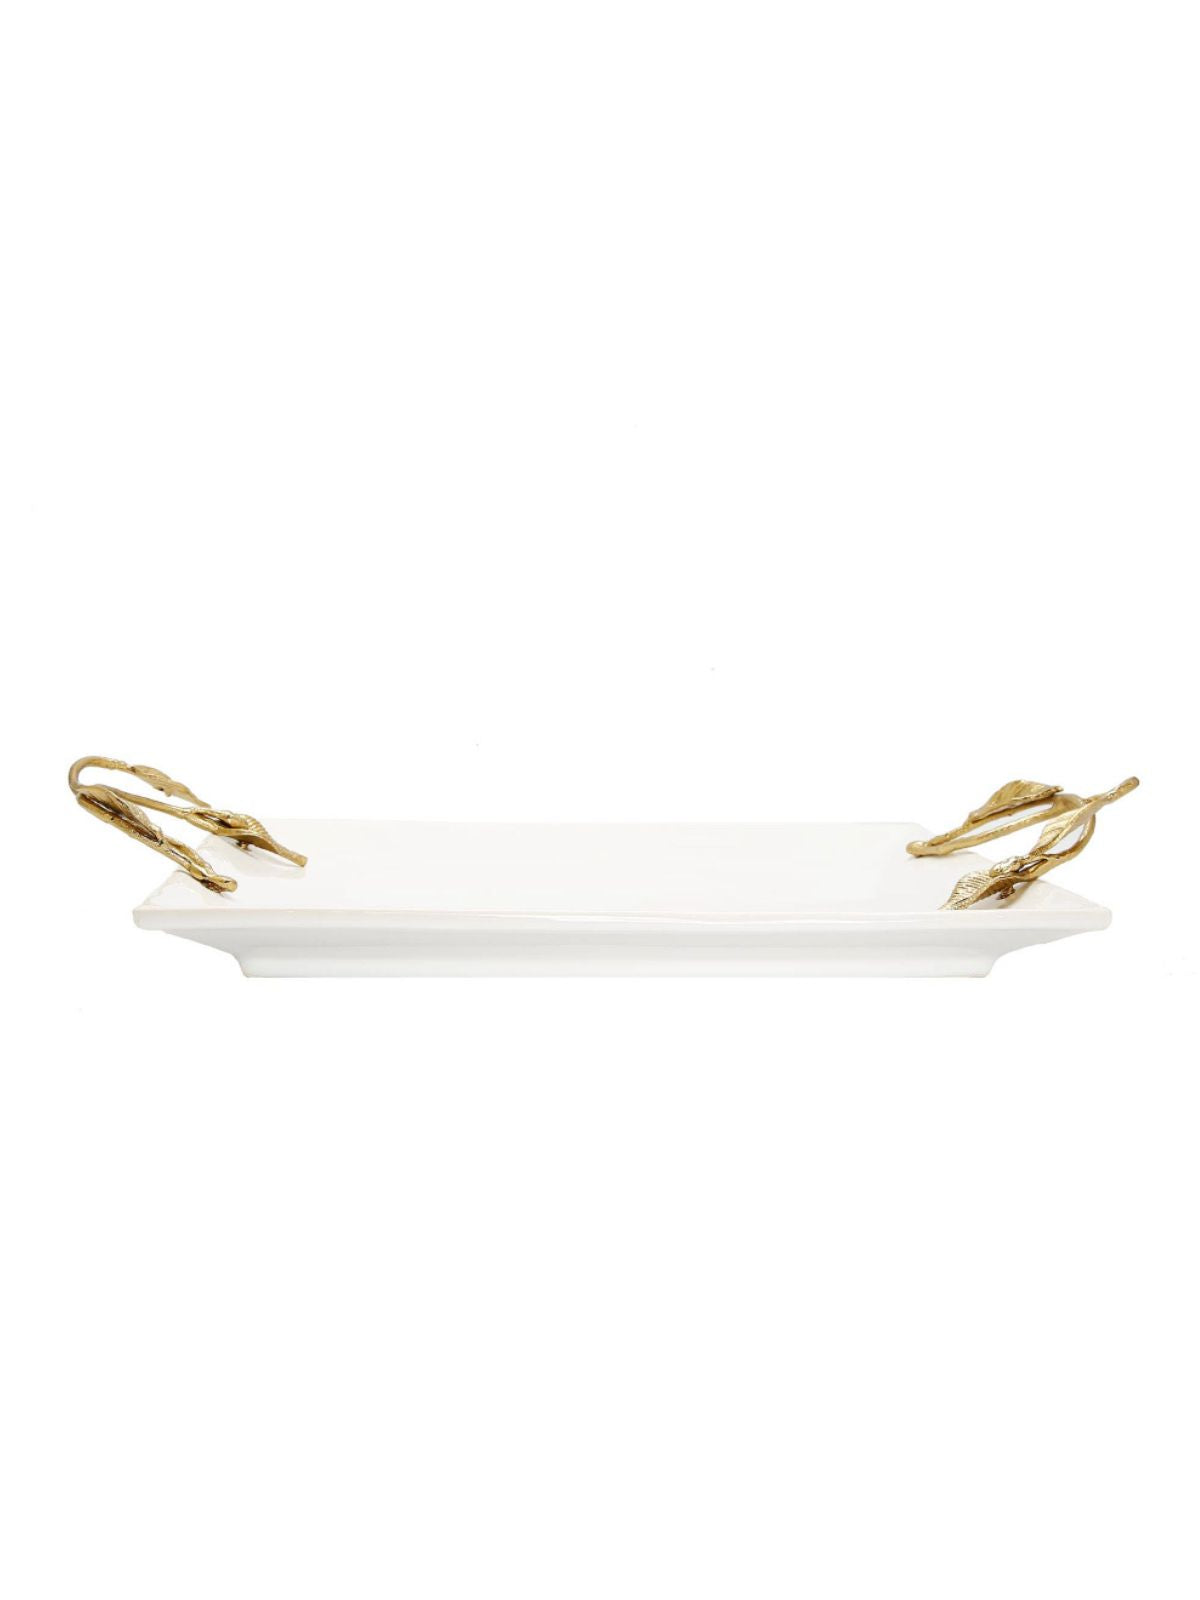 White Ceramic Tray with Gold Leaf Designed Handles, 14.5L x 10.5.